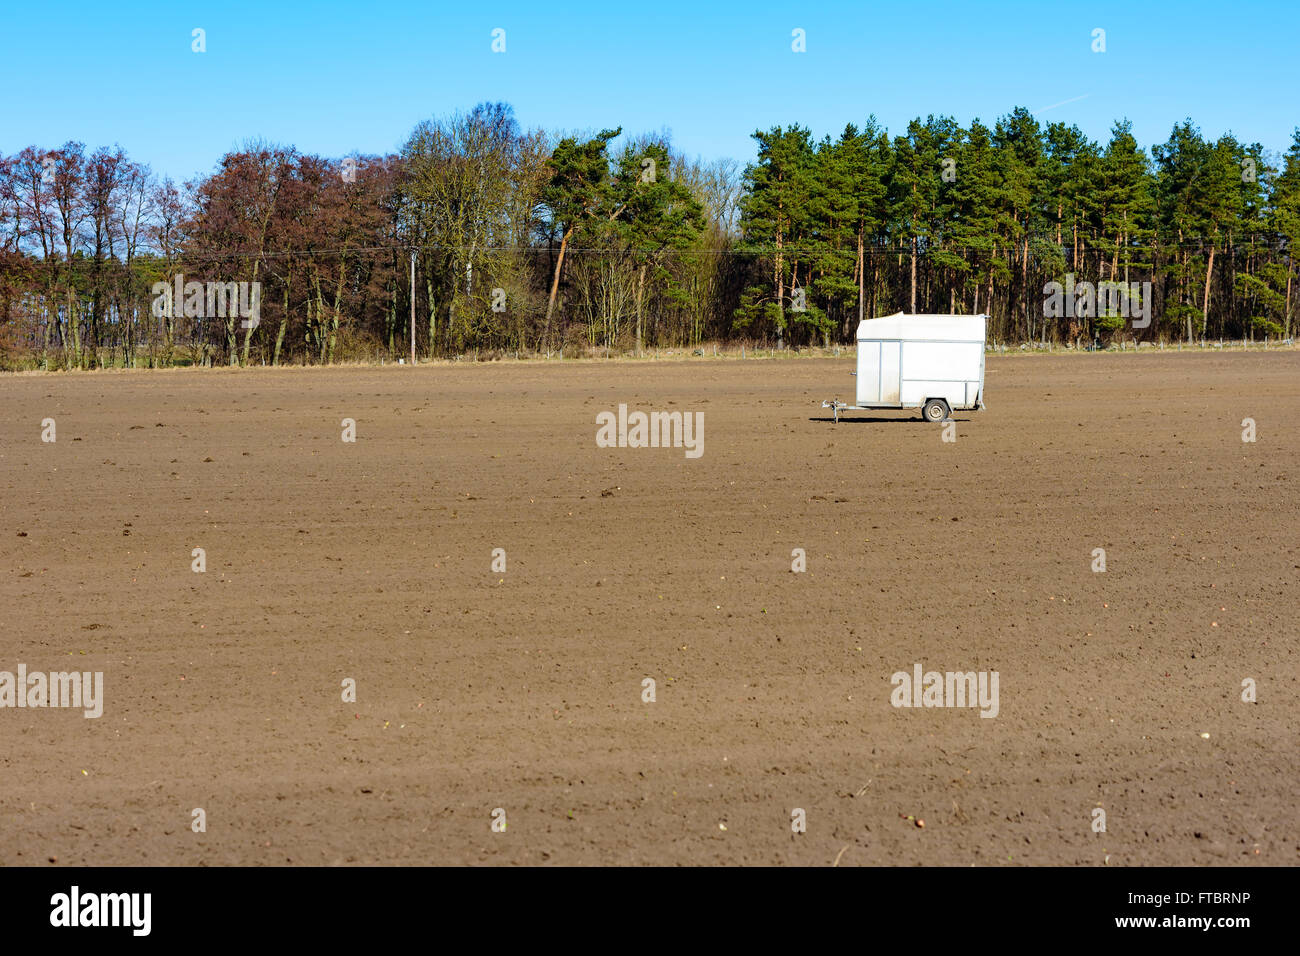 A deserted and abandoned horse trailer left on a harrowed farmers field in spring. Copy space in soil. Forest in background. Stock Photo